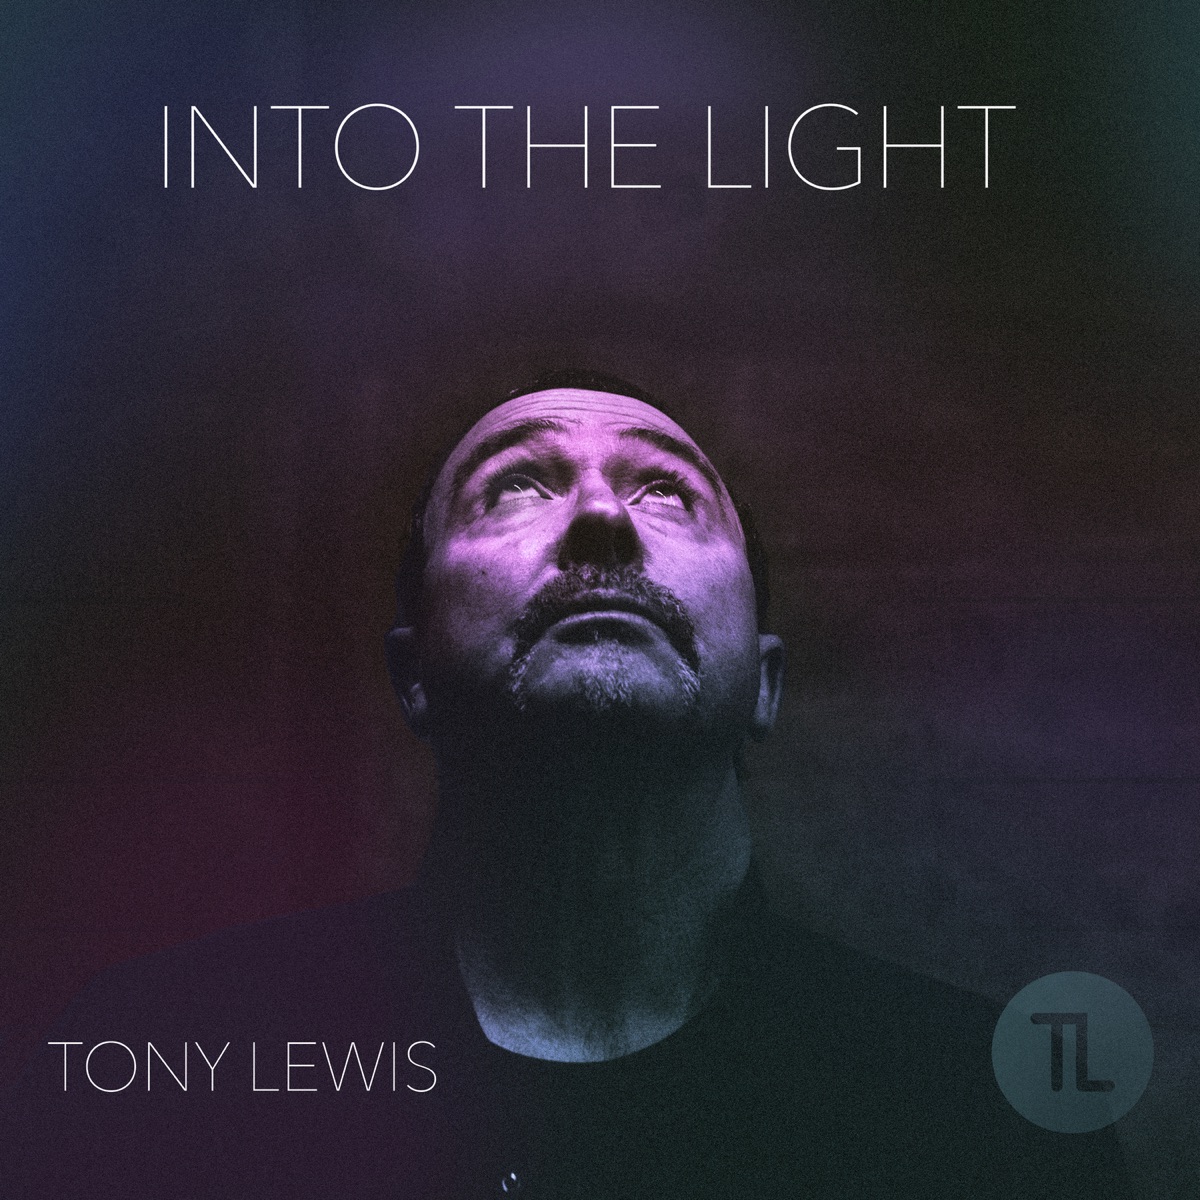 Out of the Darkness - Album by Tony Lewis - Apple Music